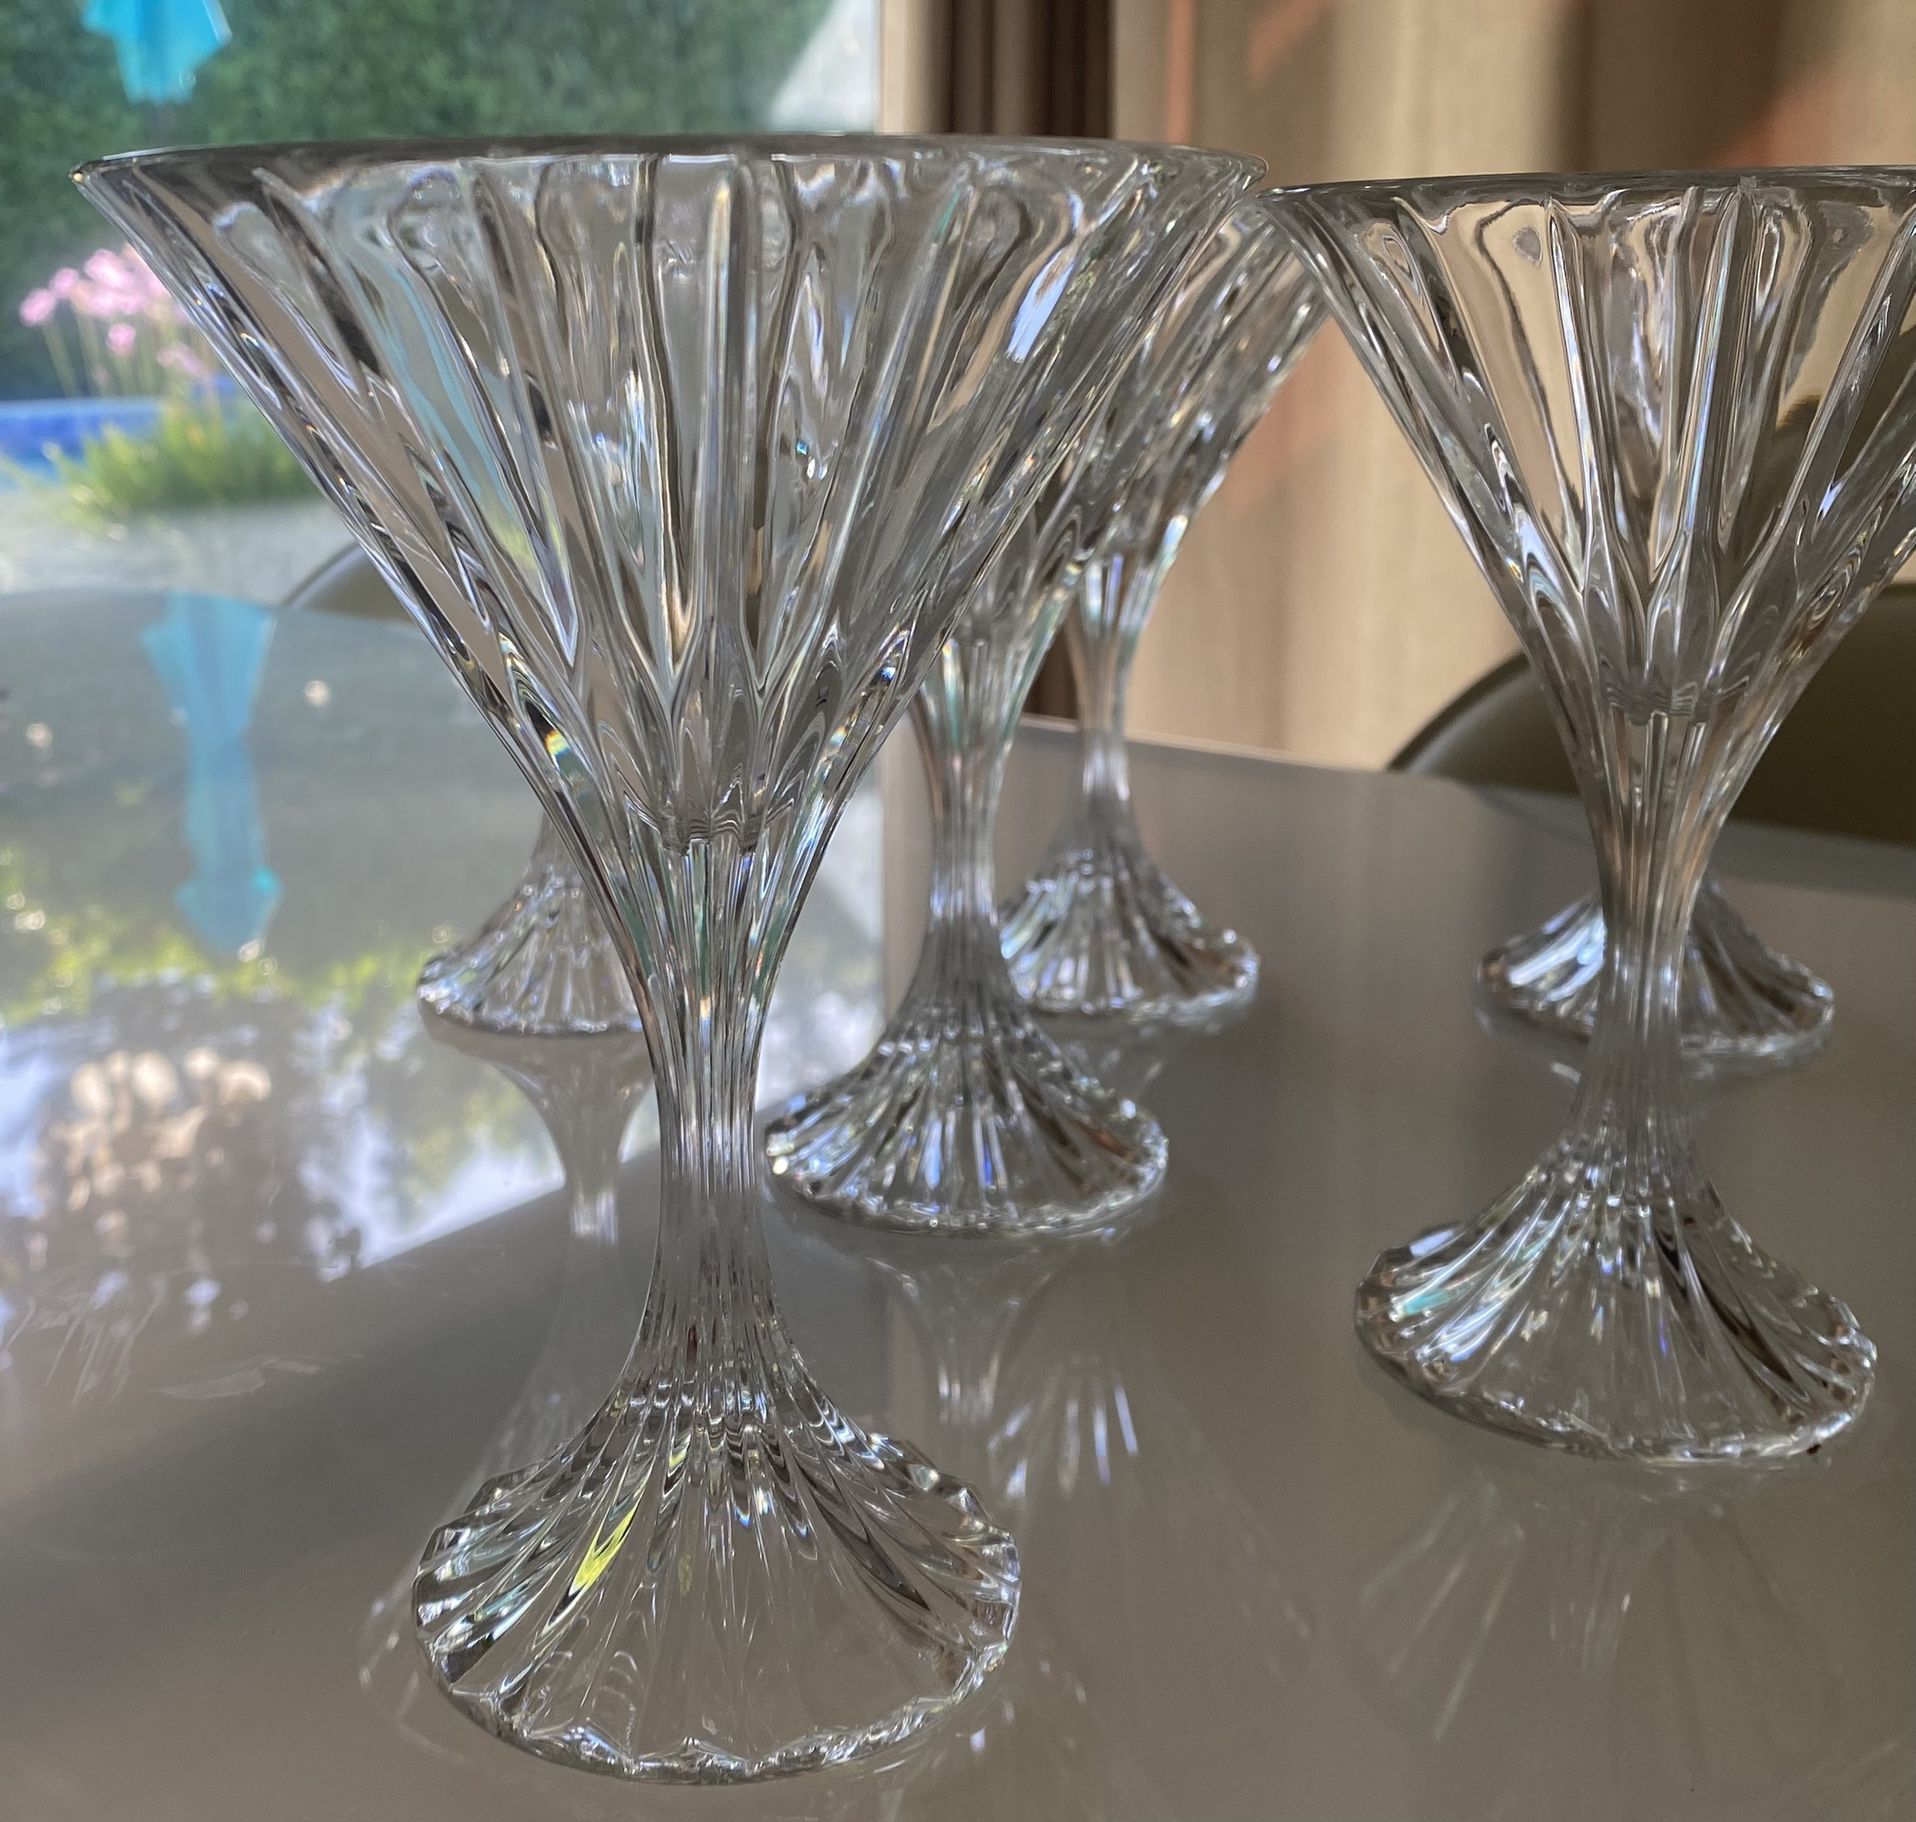 Mikasa Martini glasses set of 4 New in 2 boxes - household items - by owner  - housewares sale - craigslist